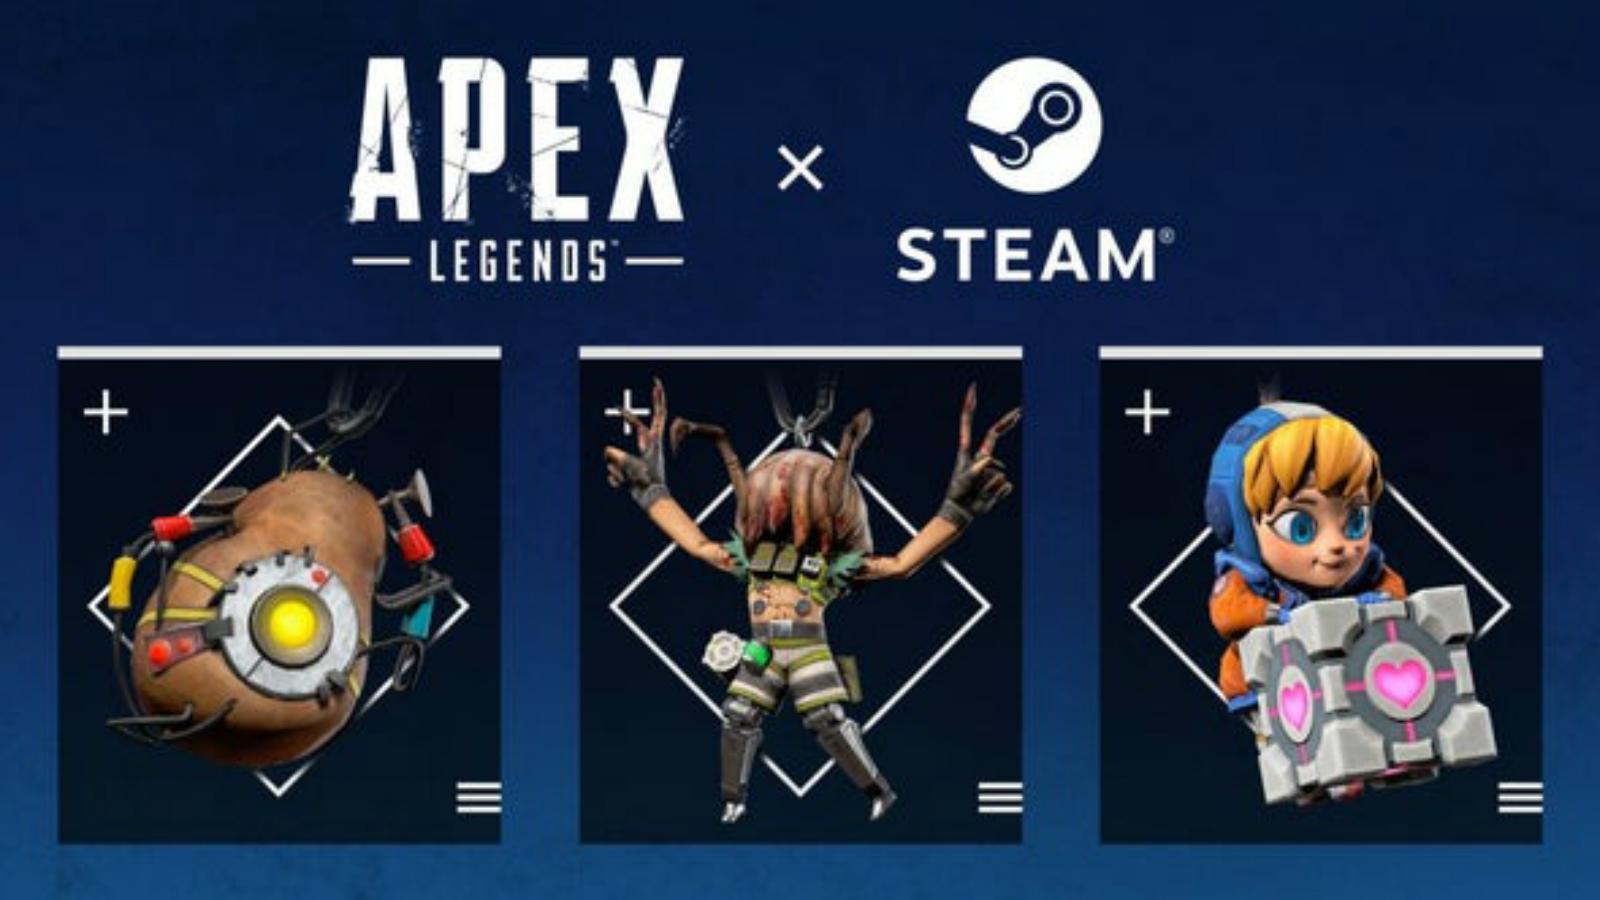 Three steam weapon charms for Apex Legends